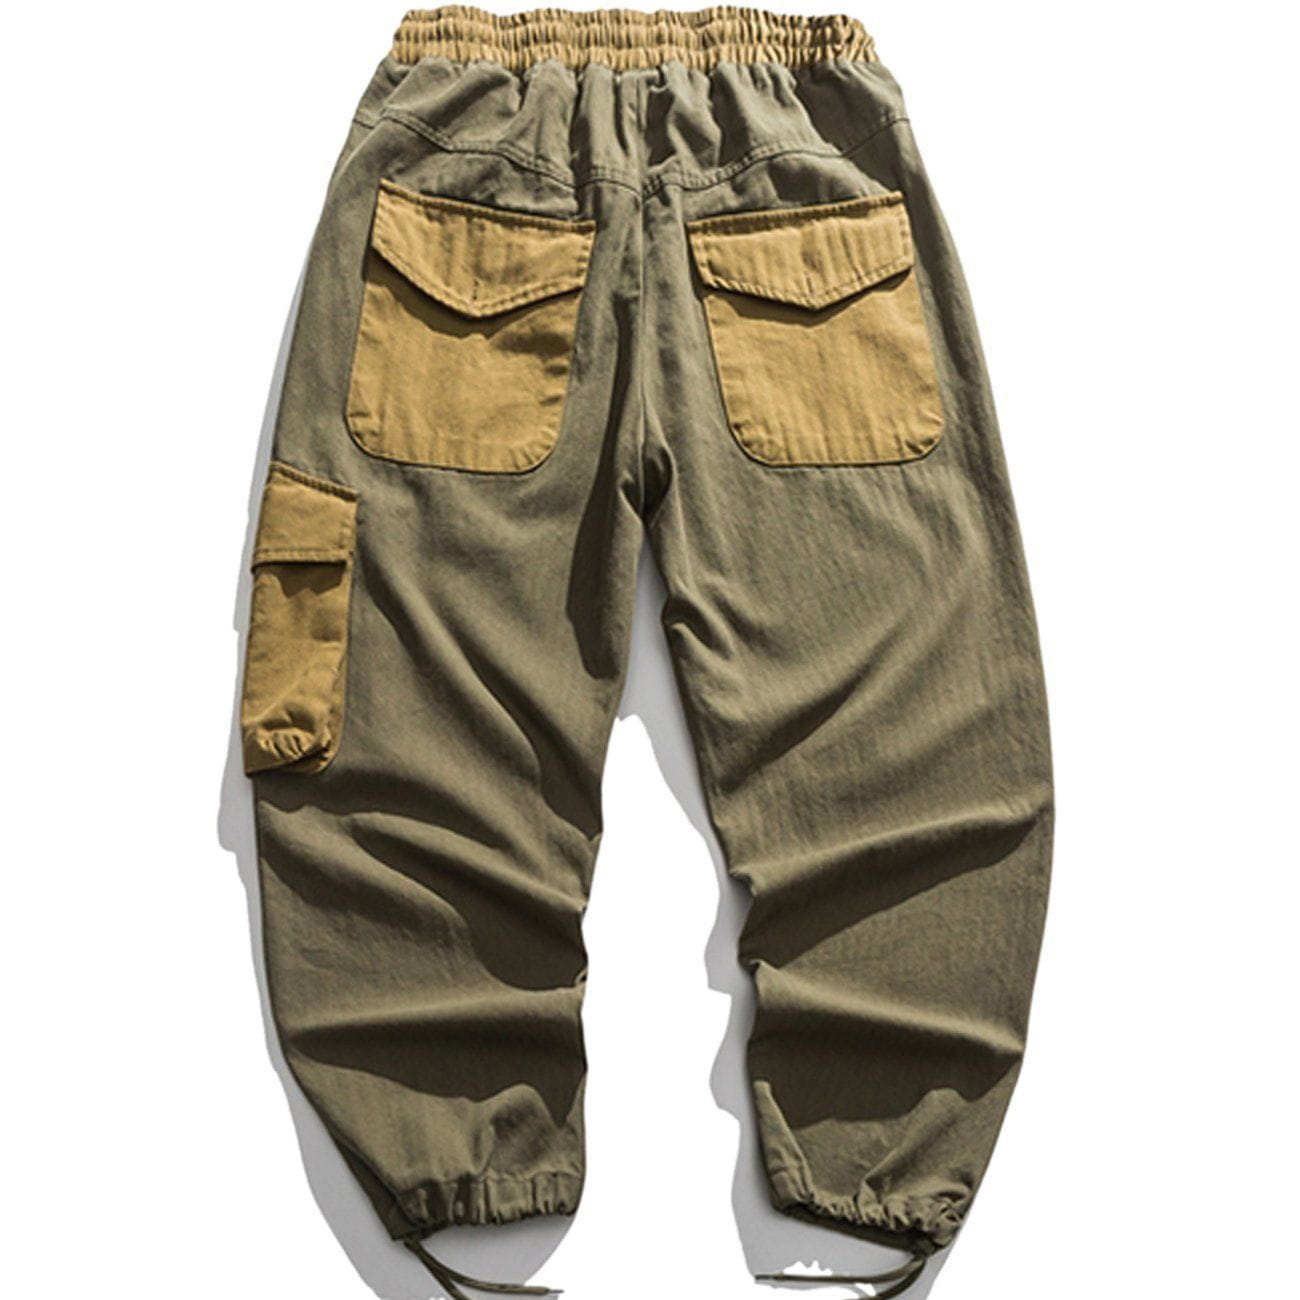 Majesda® - Solid Color Cargo Pants outfit ideas streetwear fashion